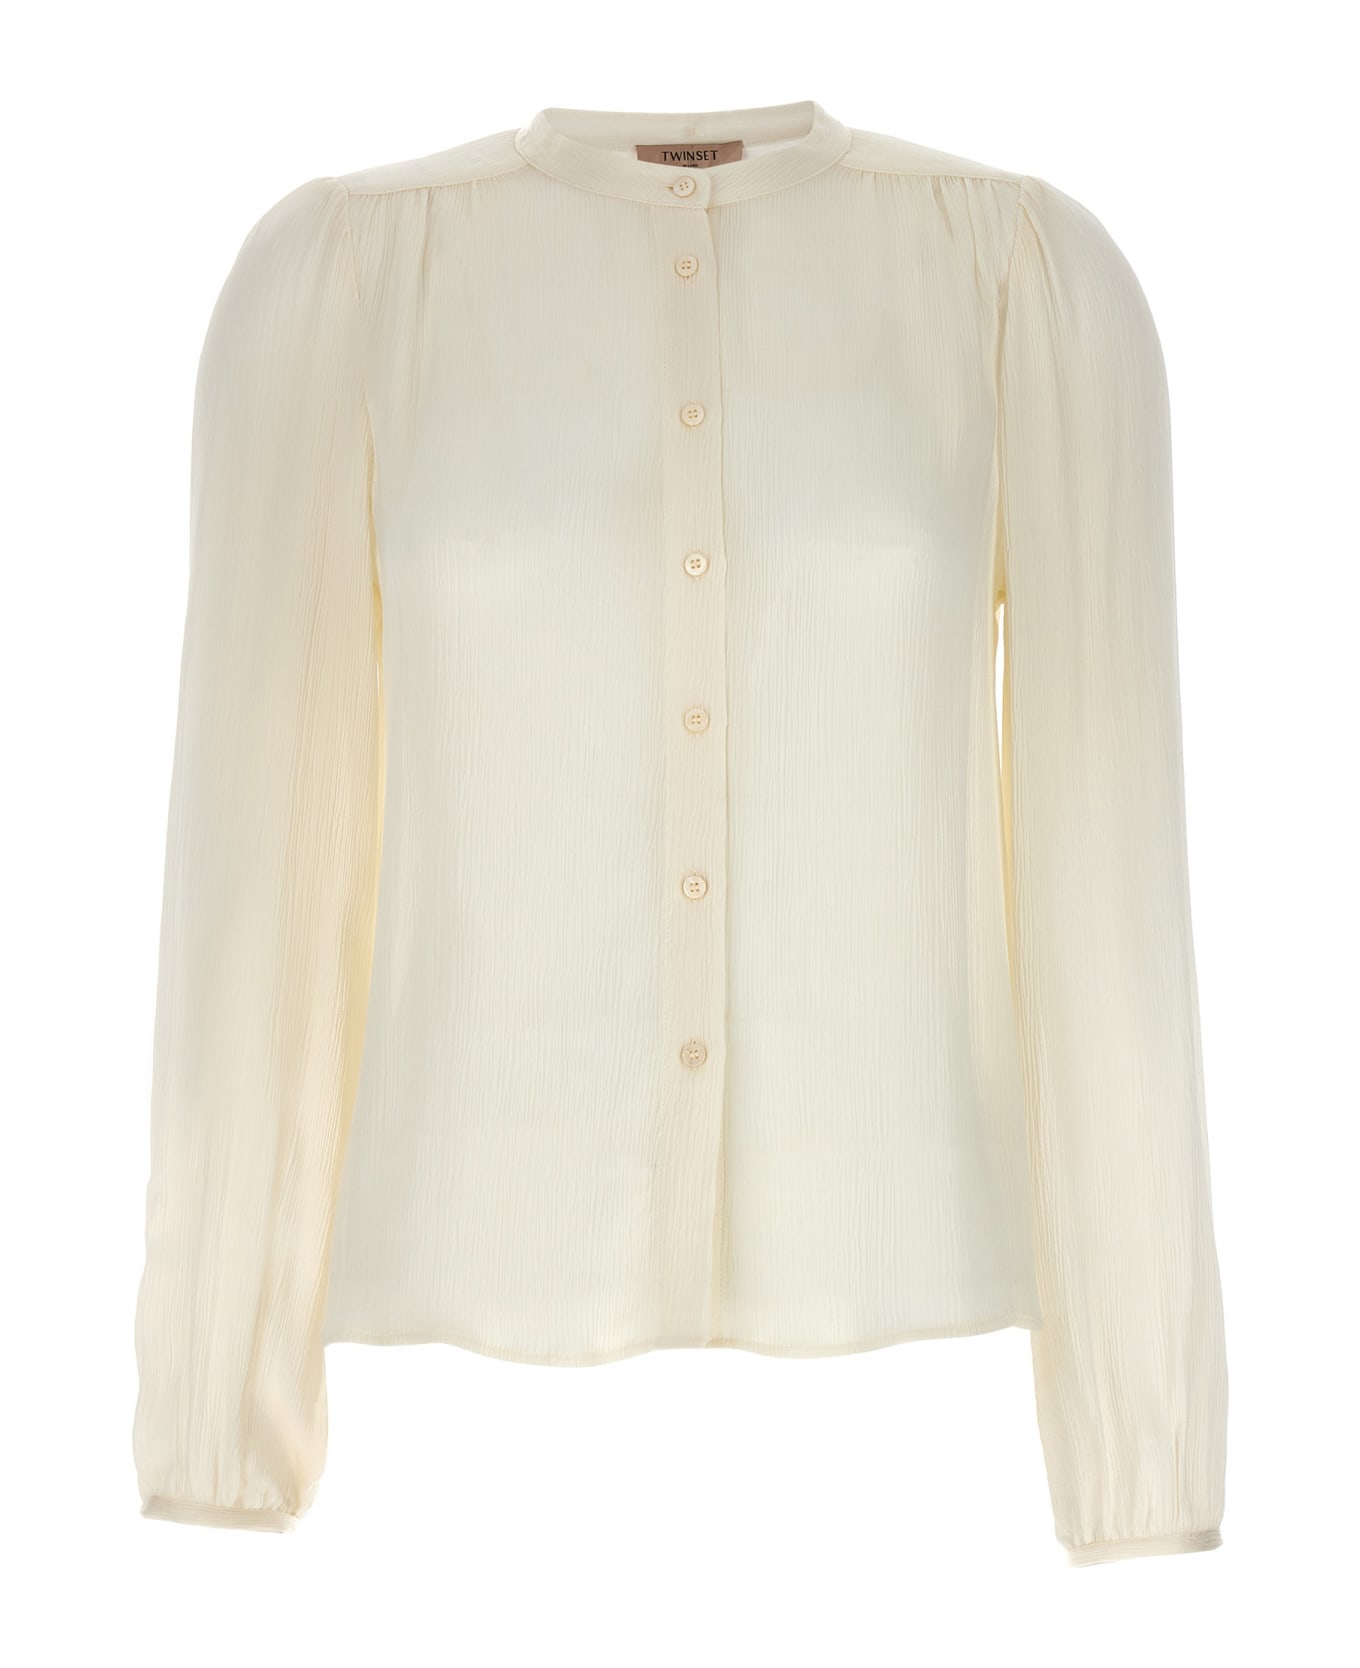 TwinSet Feather Detail Shirt - White